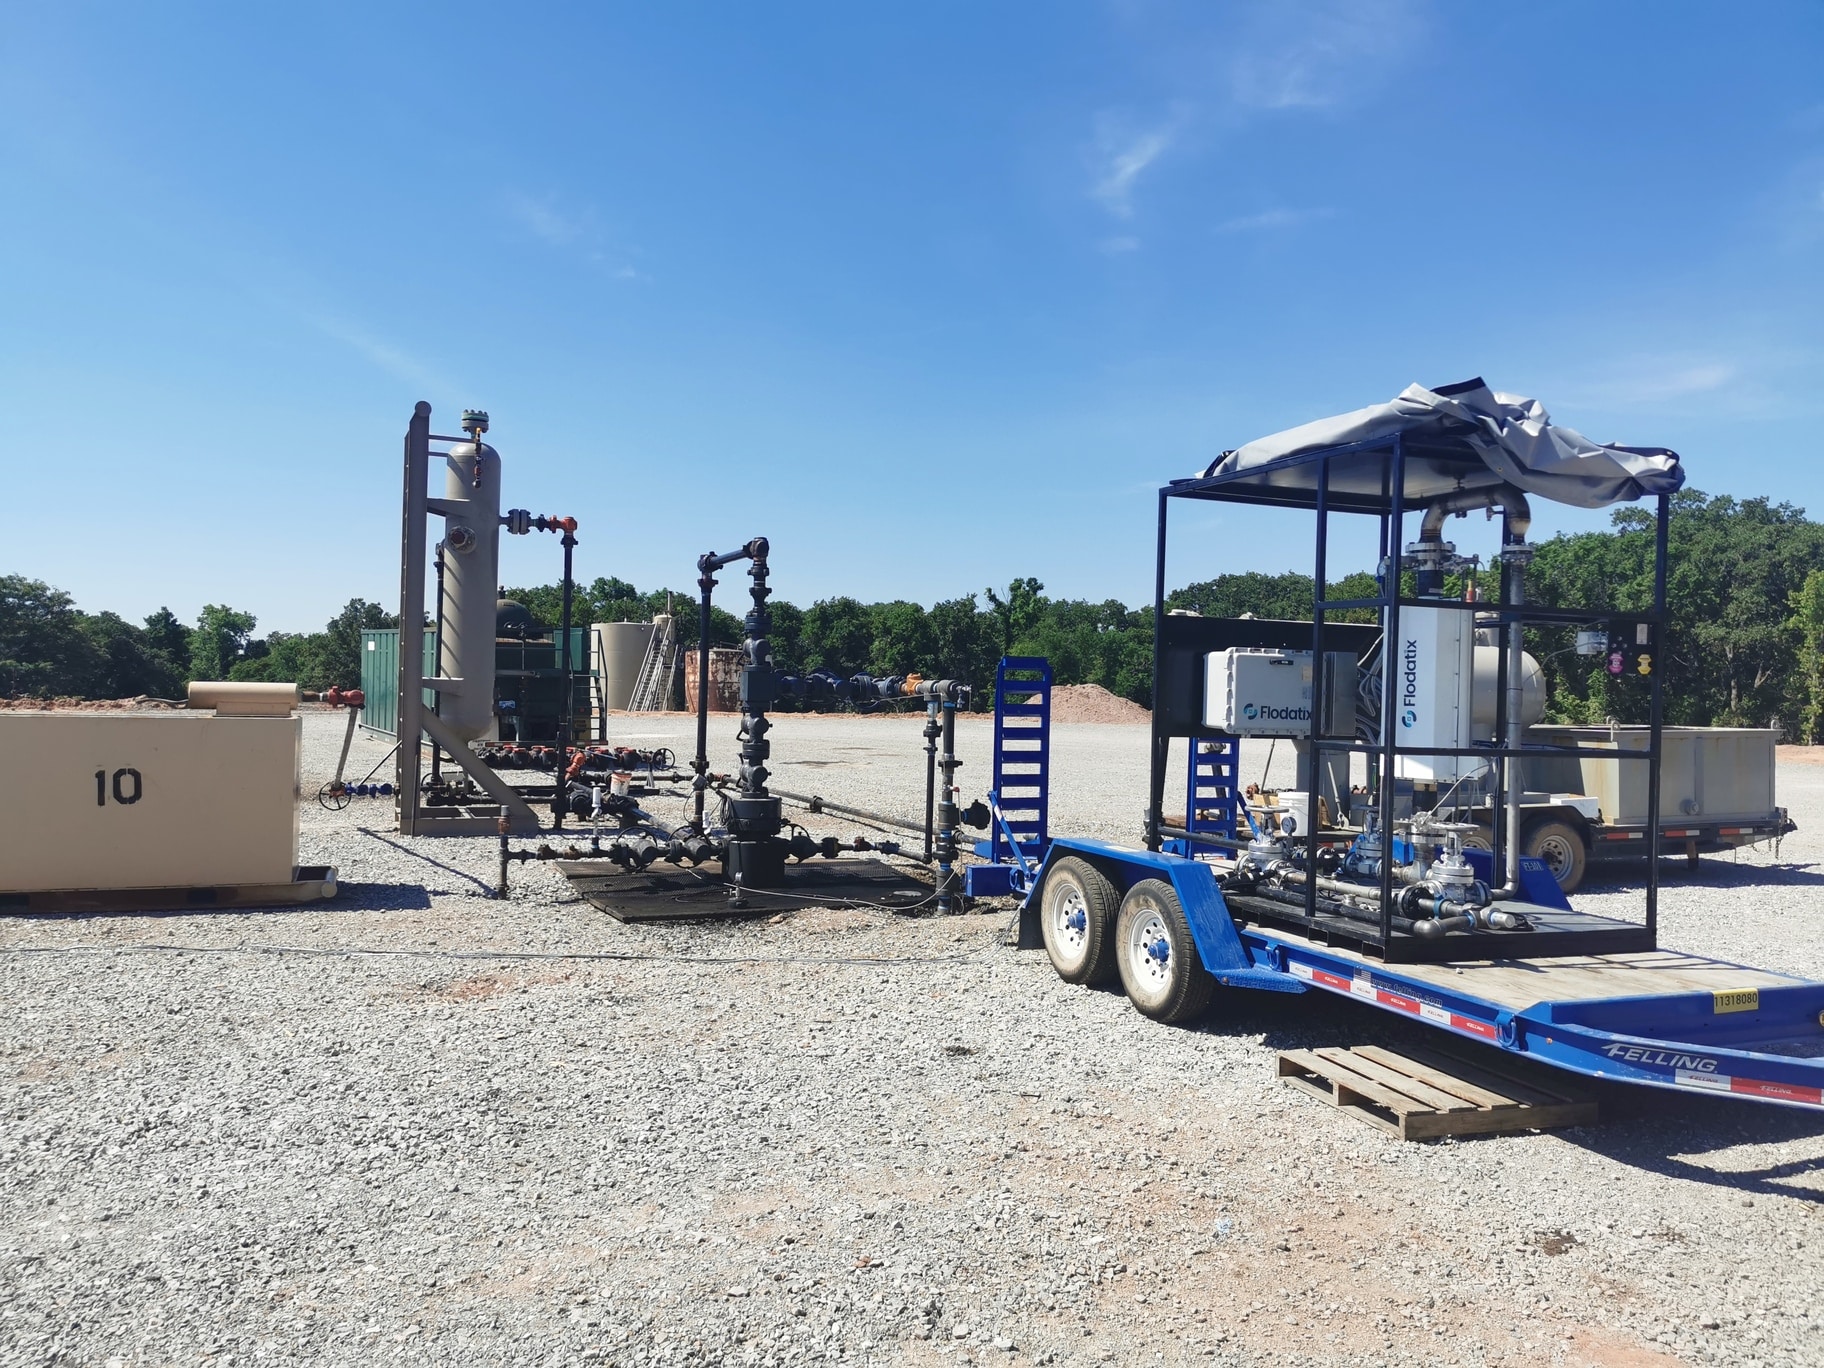 Flodatix Field Testing: Advancing Multiphase Flow Metering in the Oil & Gas Industry